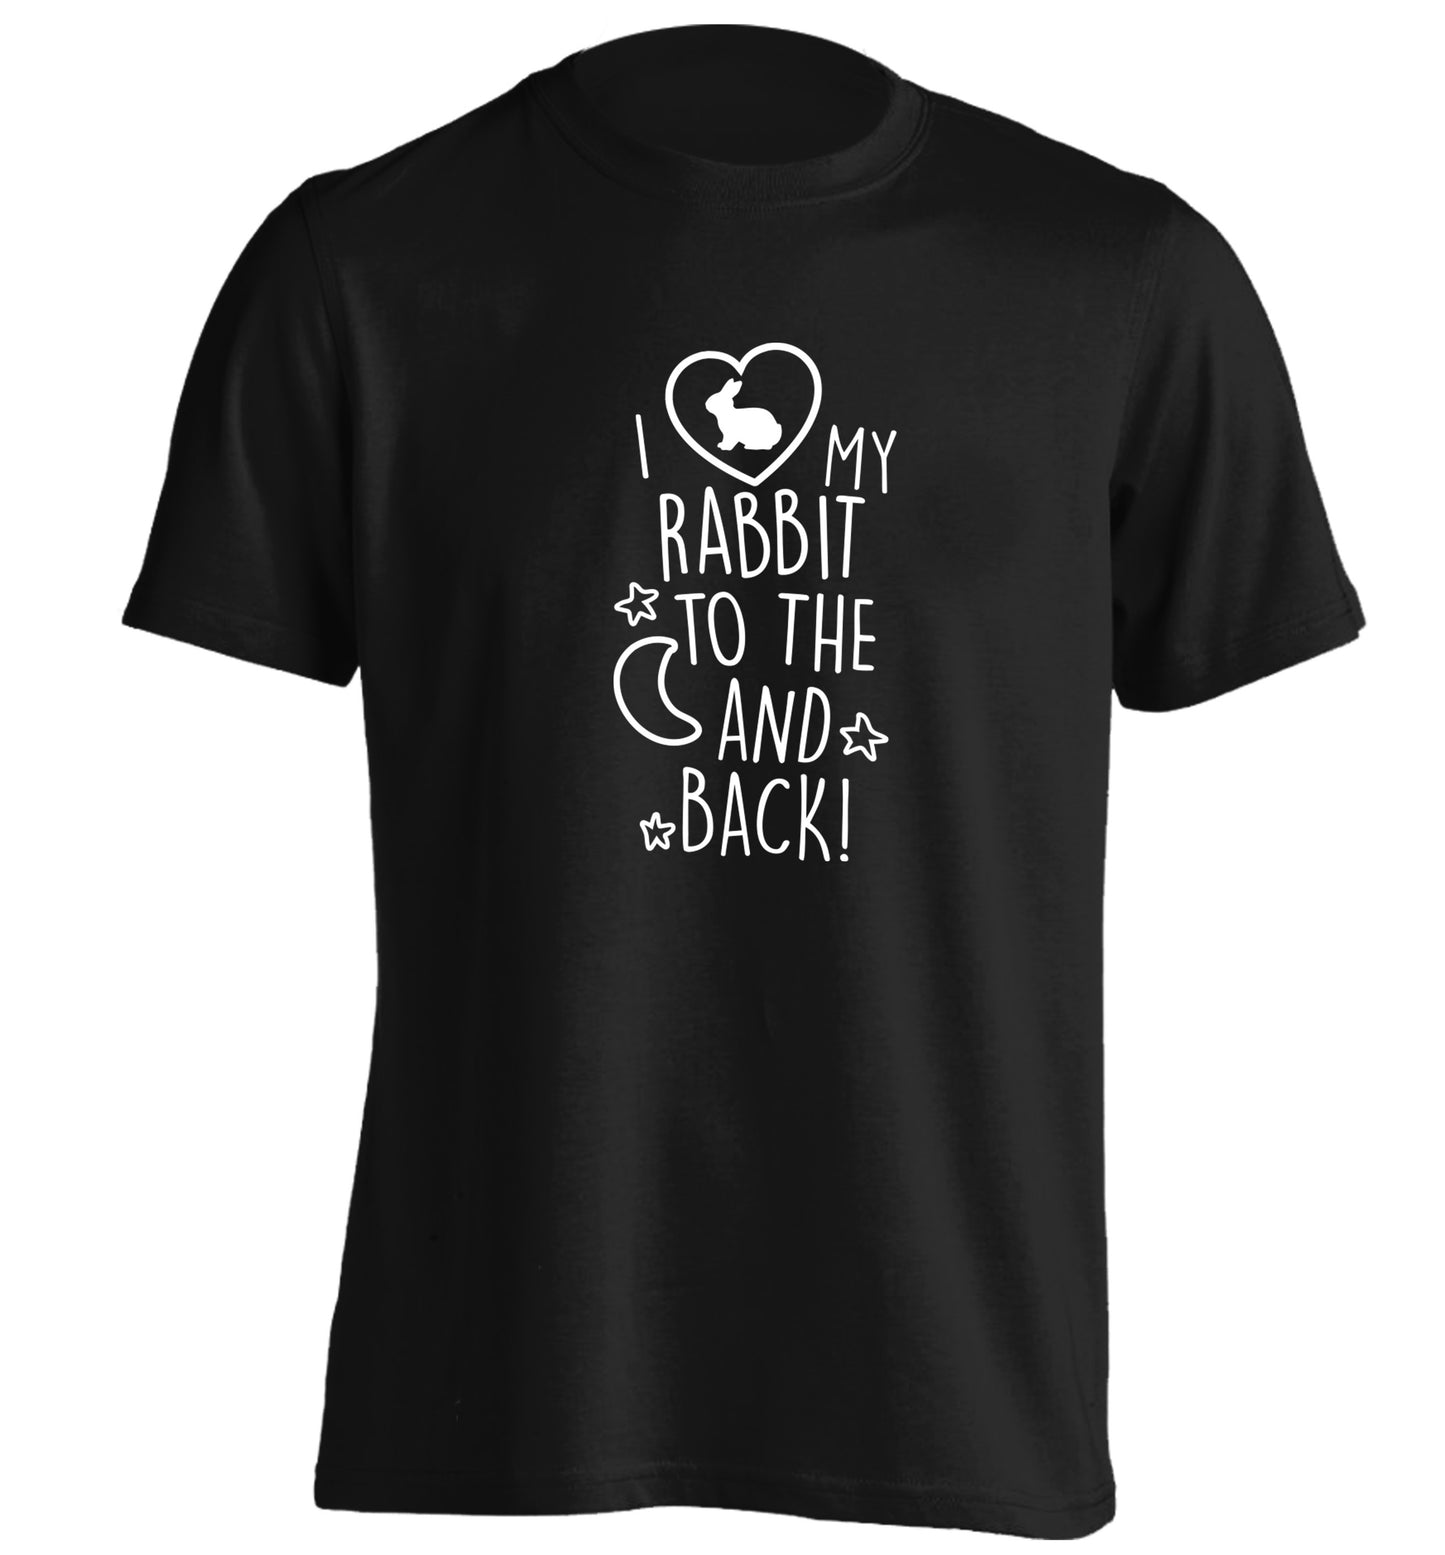 I love my rabbit to the moon and back adults unisex black Tshirt 2XL